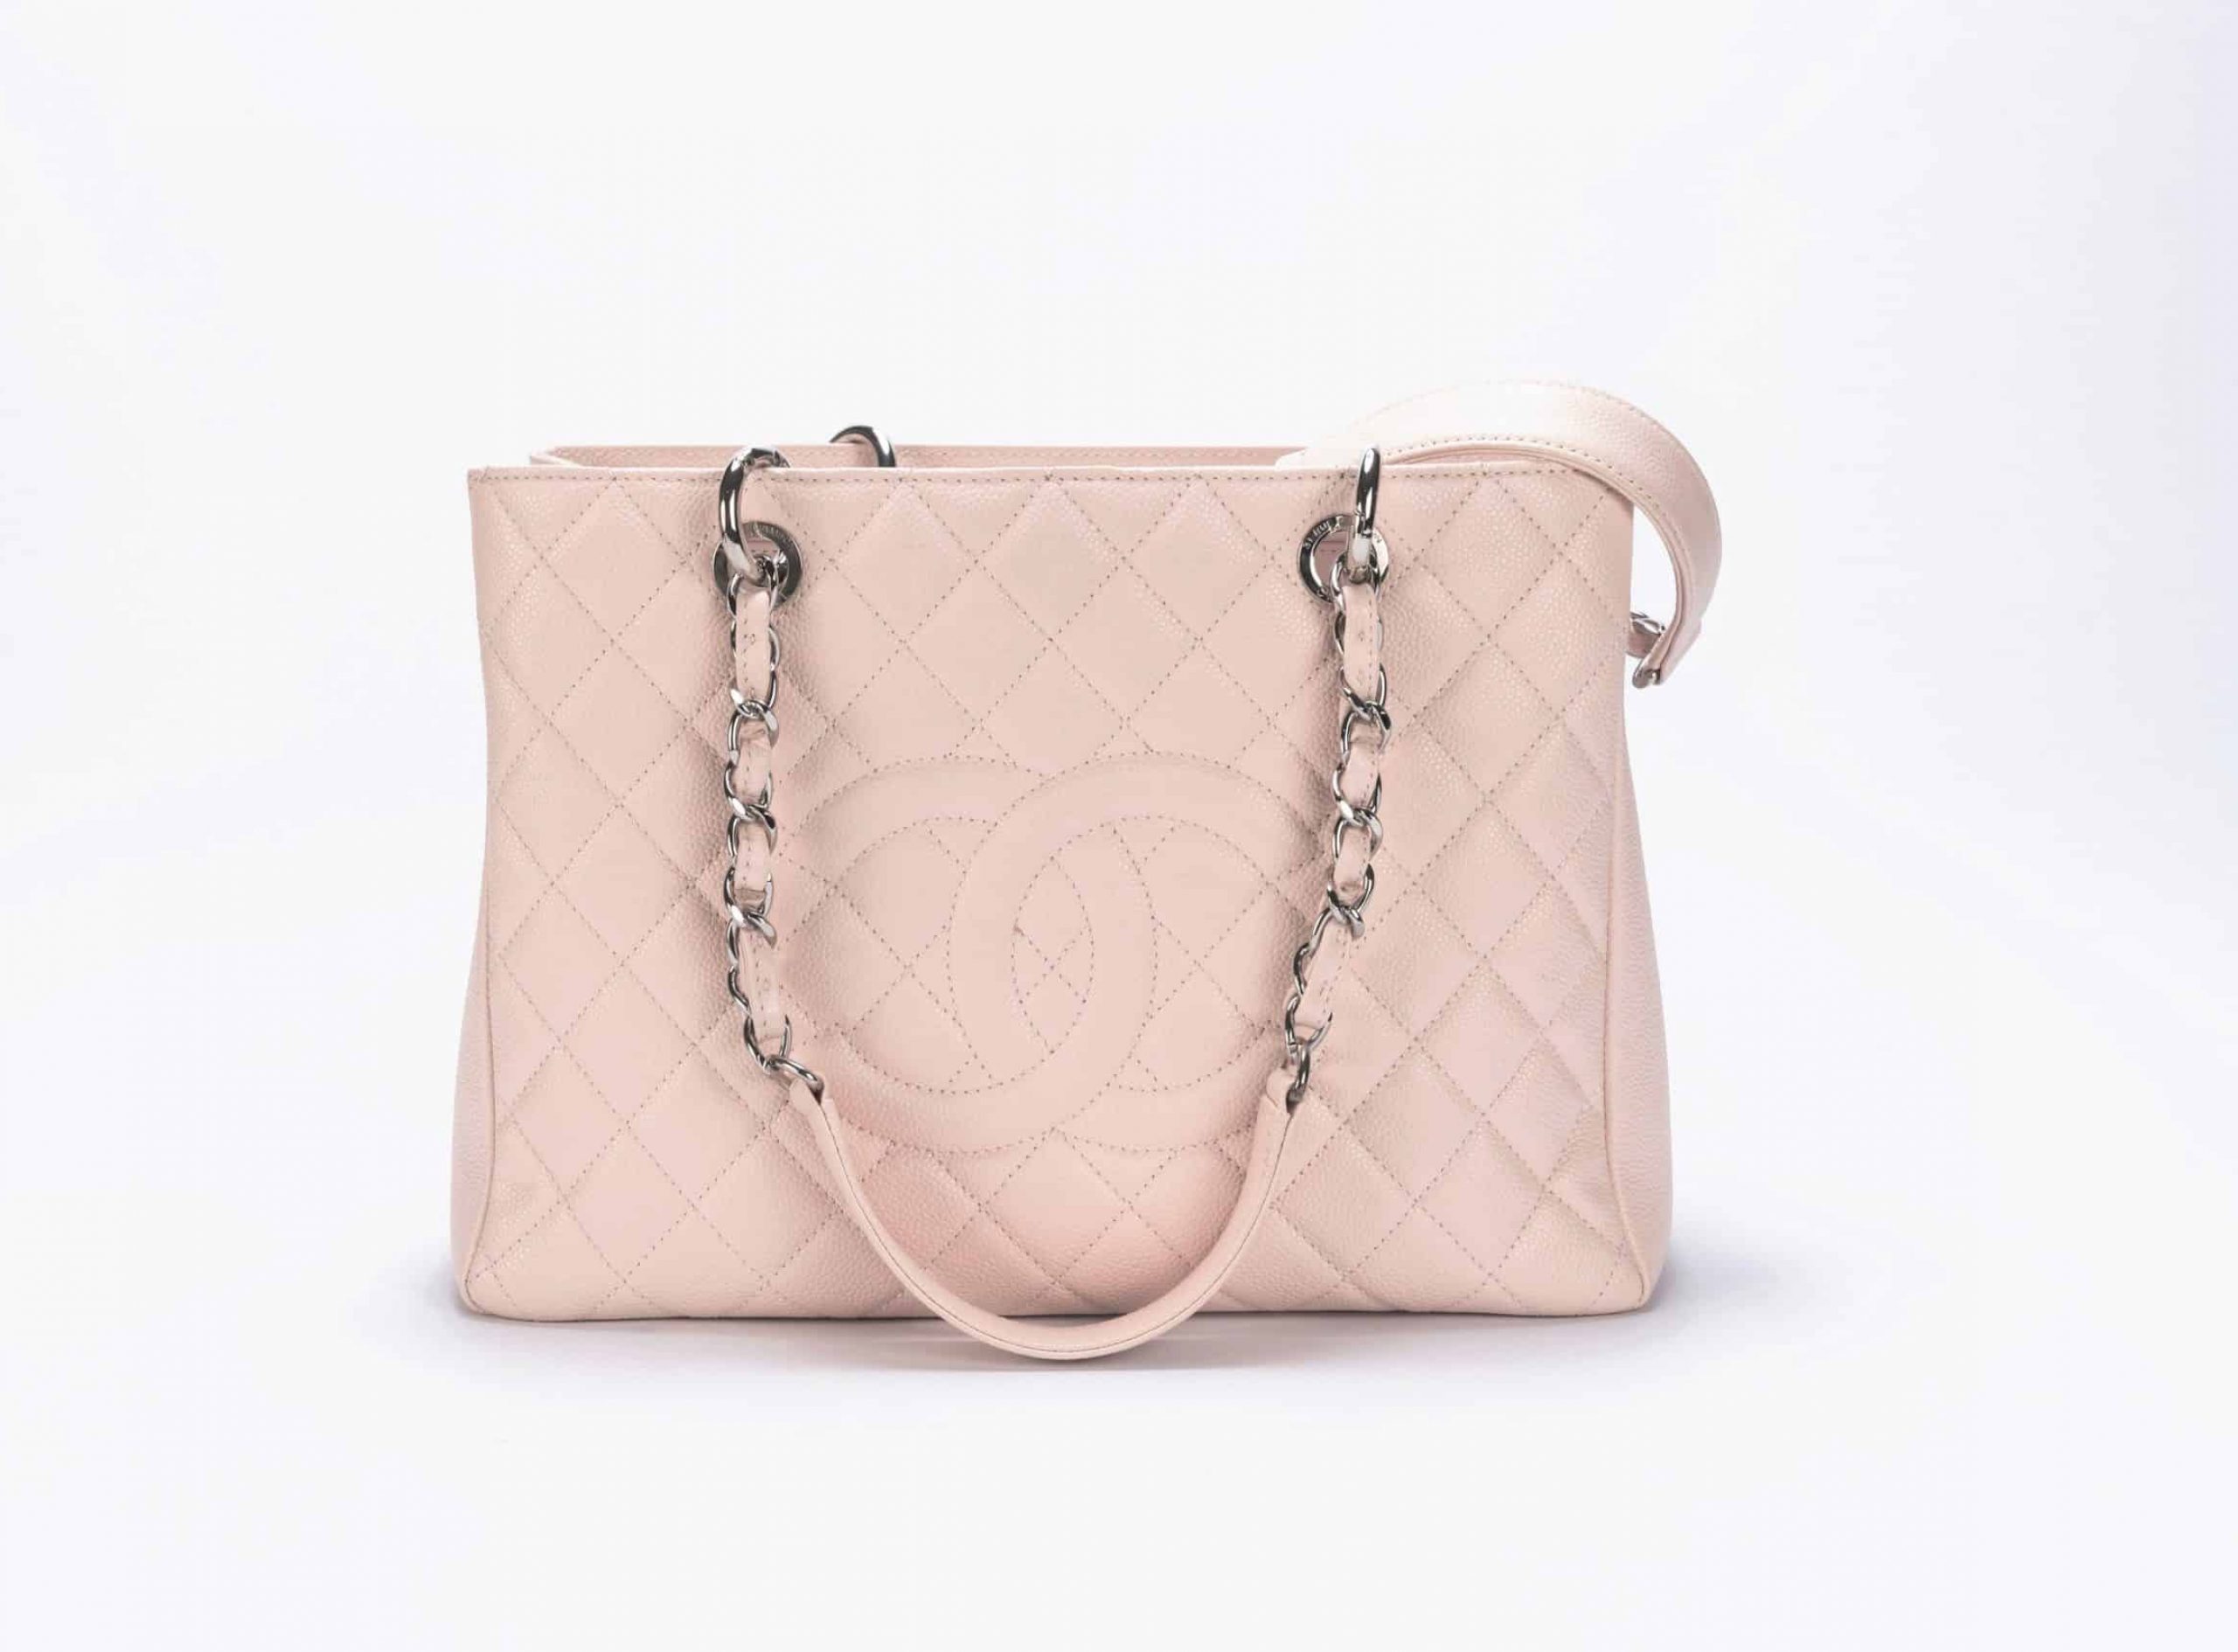 Chanel GST Caviar Quilted Bag in Light Pink with Silver Hardware (4)